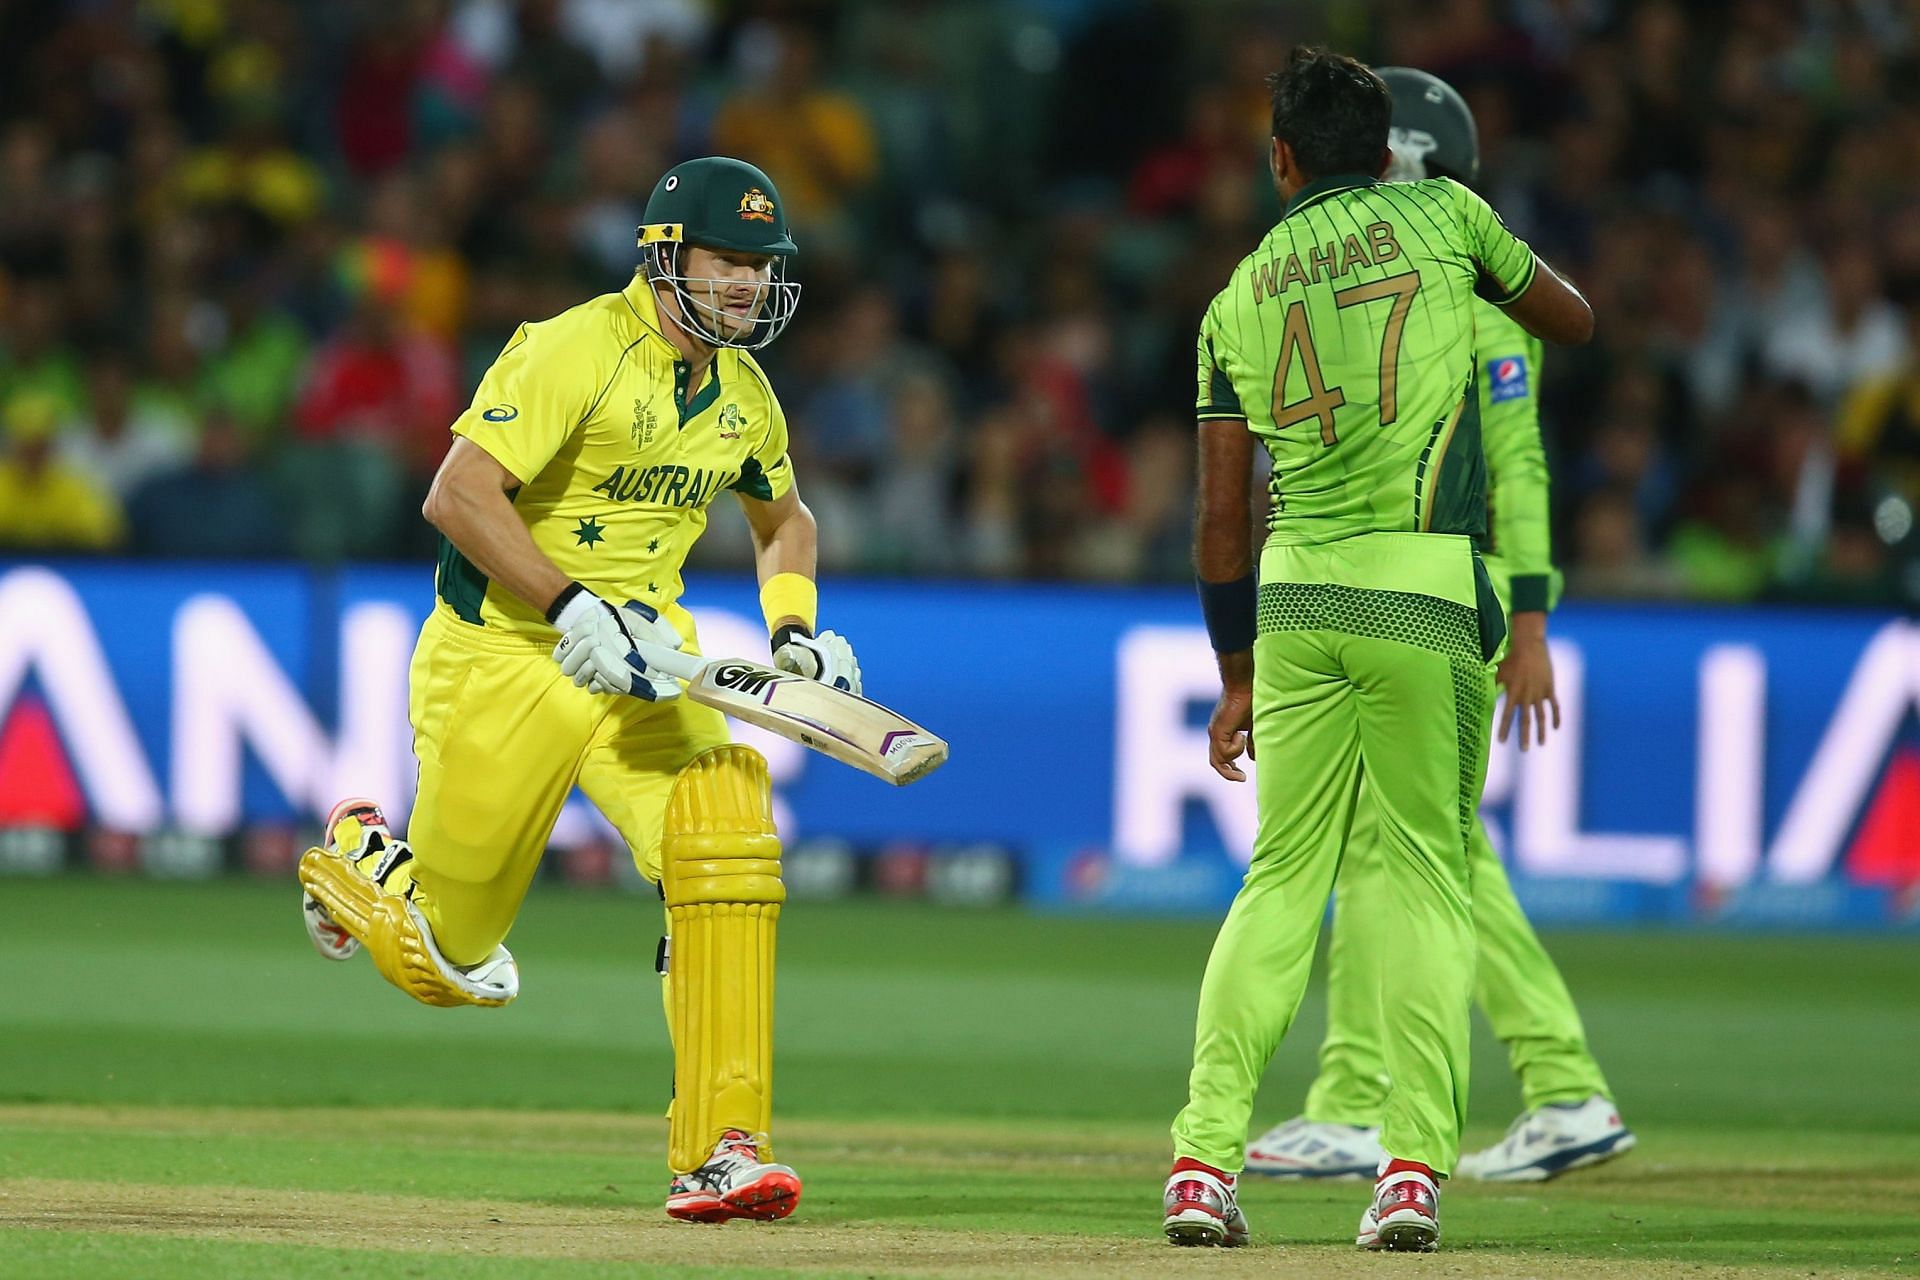 Shane Watson survived the fiery spell to take Australia to victory. (Pic: Getty Images)